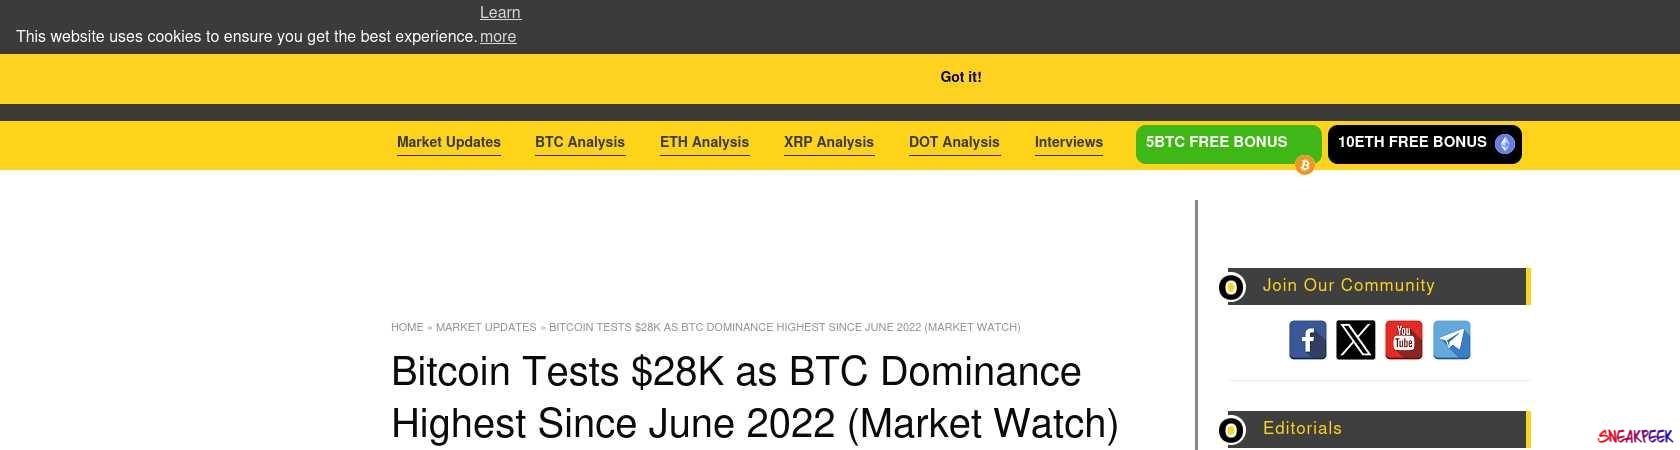 Read the full Article:  ⭲ Bitcoin Tests $28K as BTC Dominance Highest Since June 2022 (Market Watch)